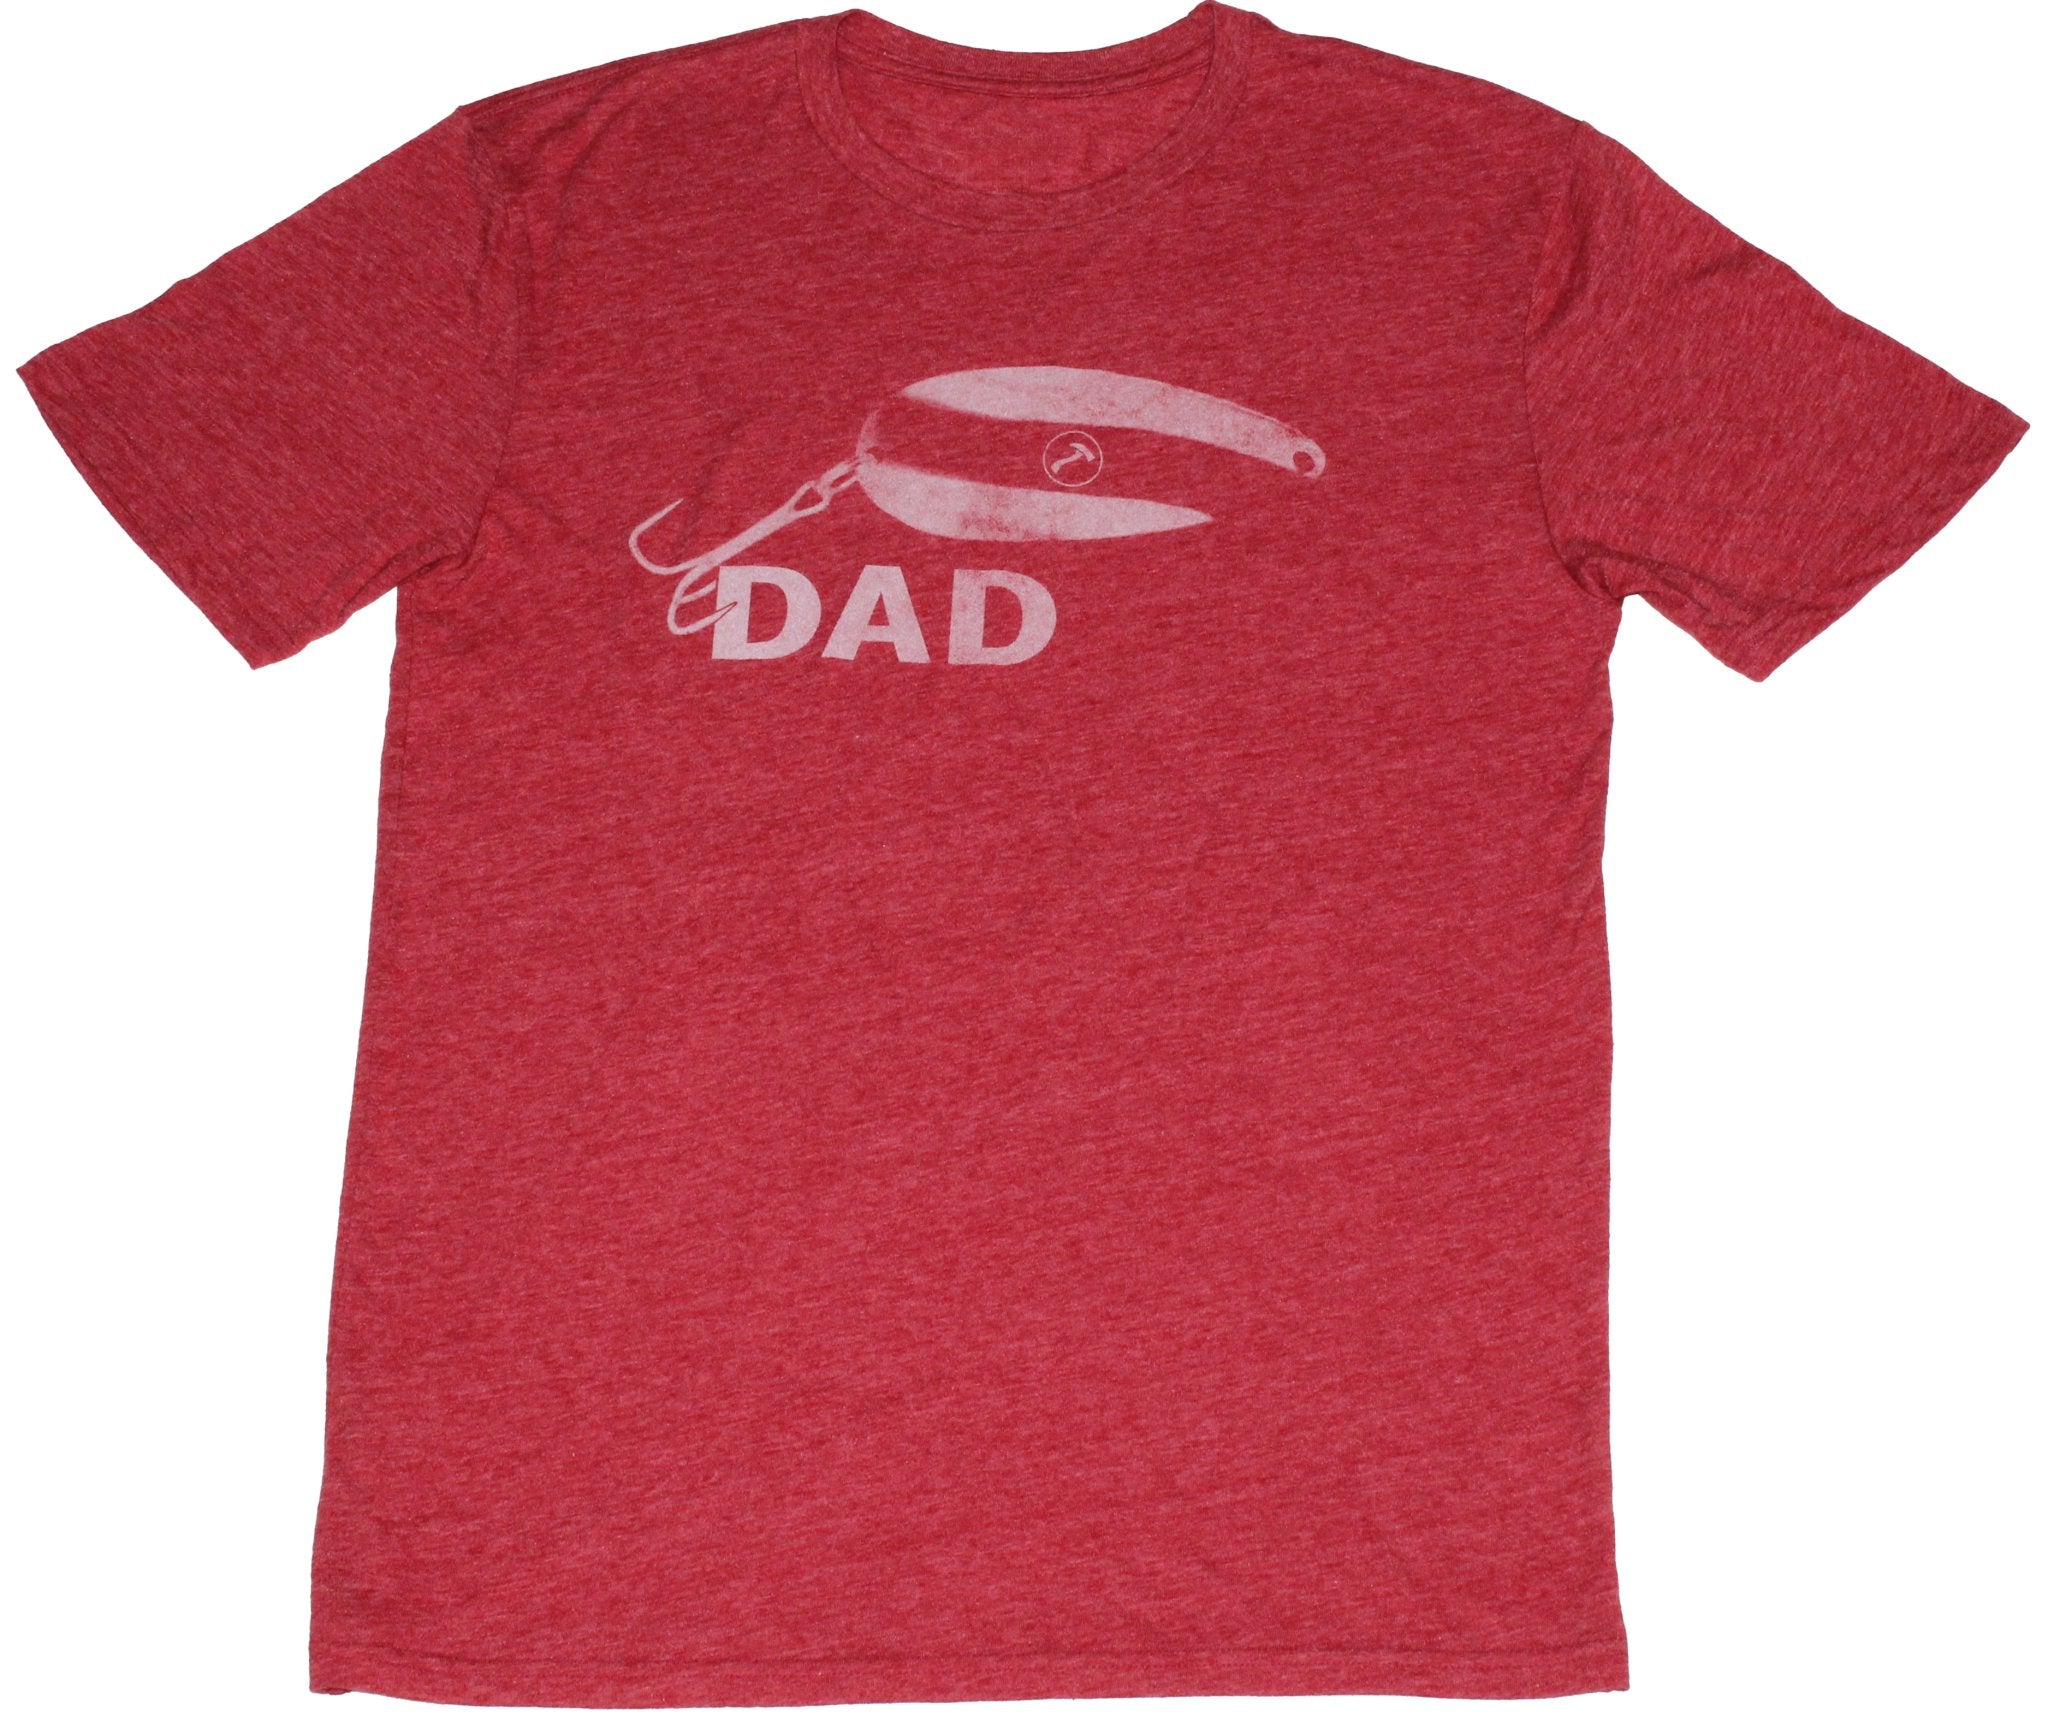 Lure Dad Tee - 15020 - 76934 - Hammer Made